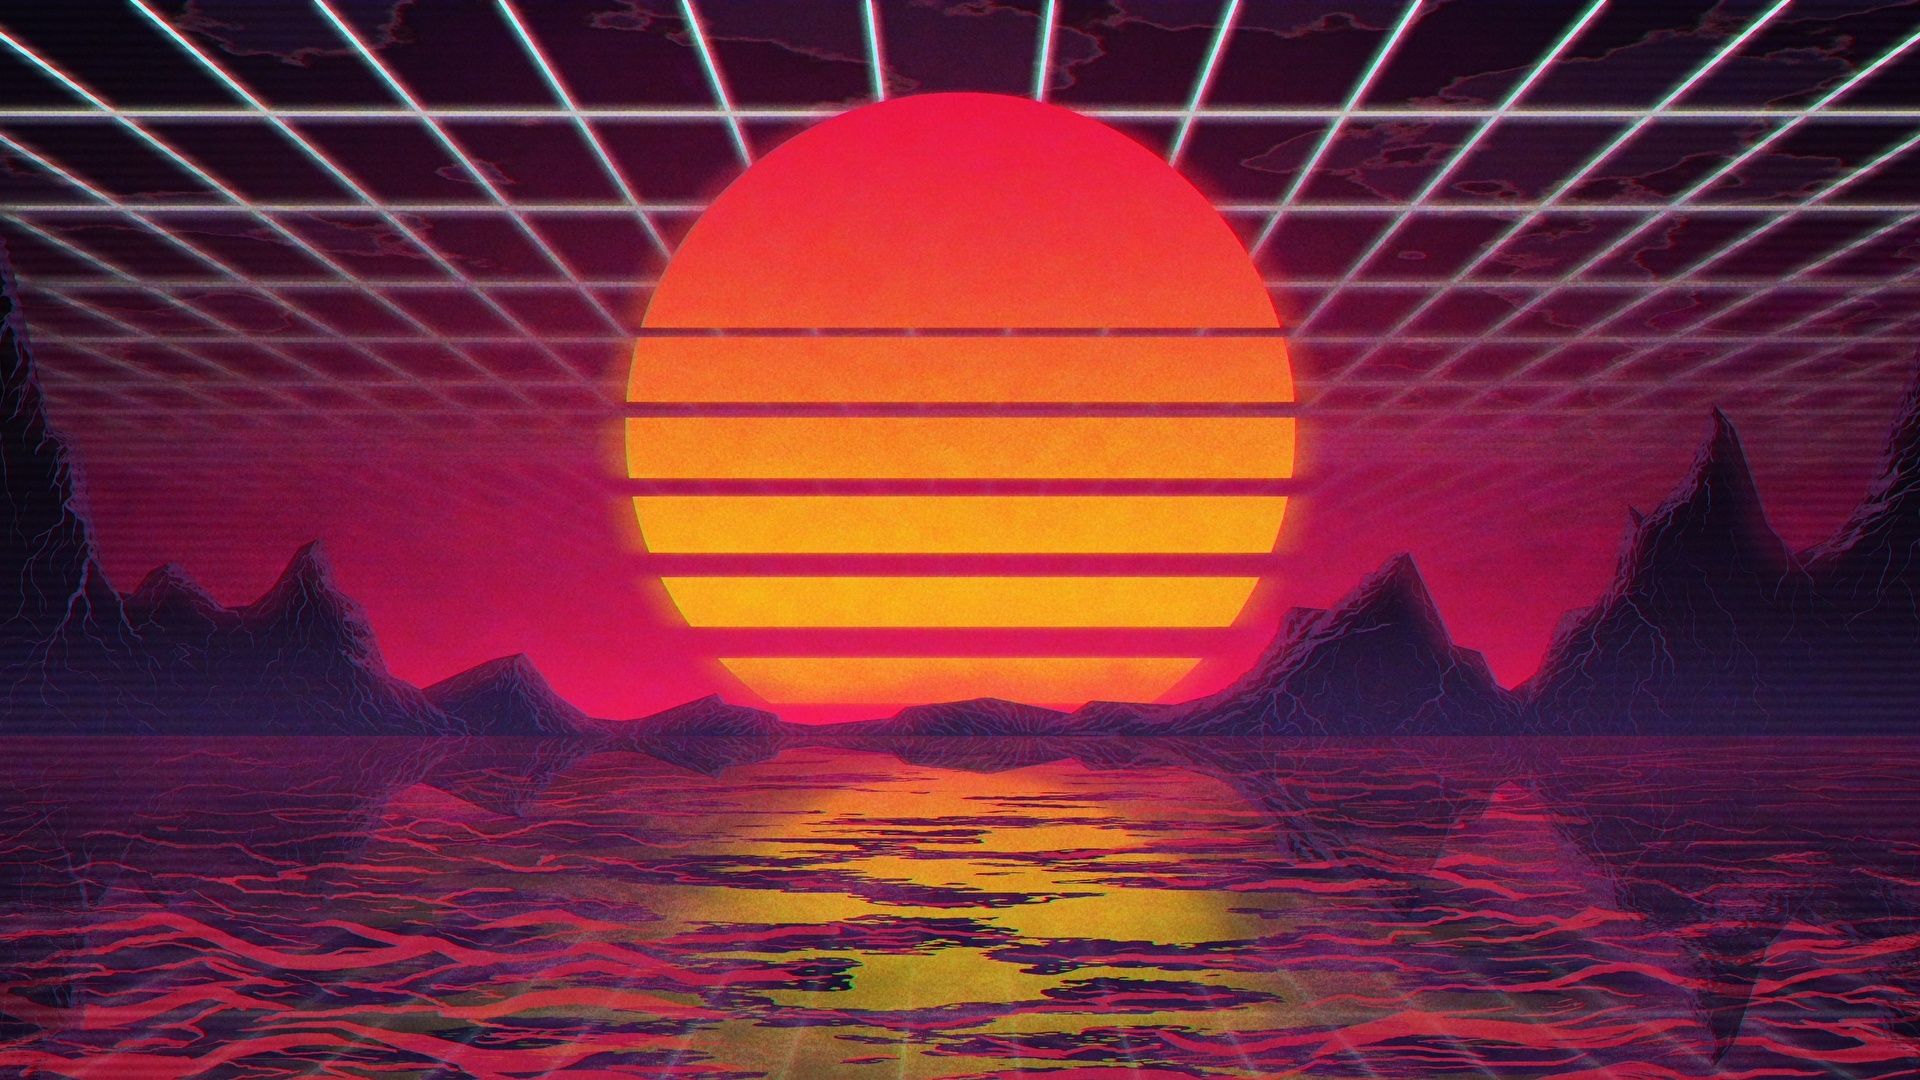 Sunrises_and_sunsets_Synthwave_Sun_562744_1920x1080-1